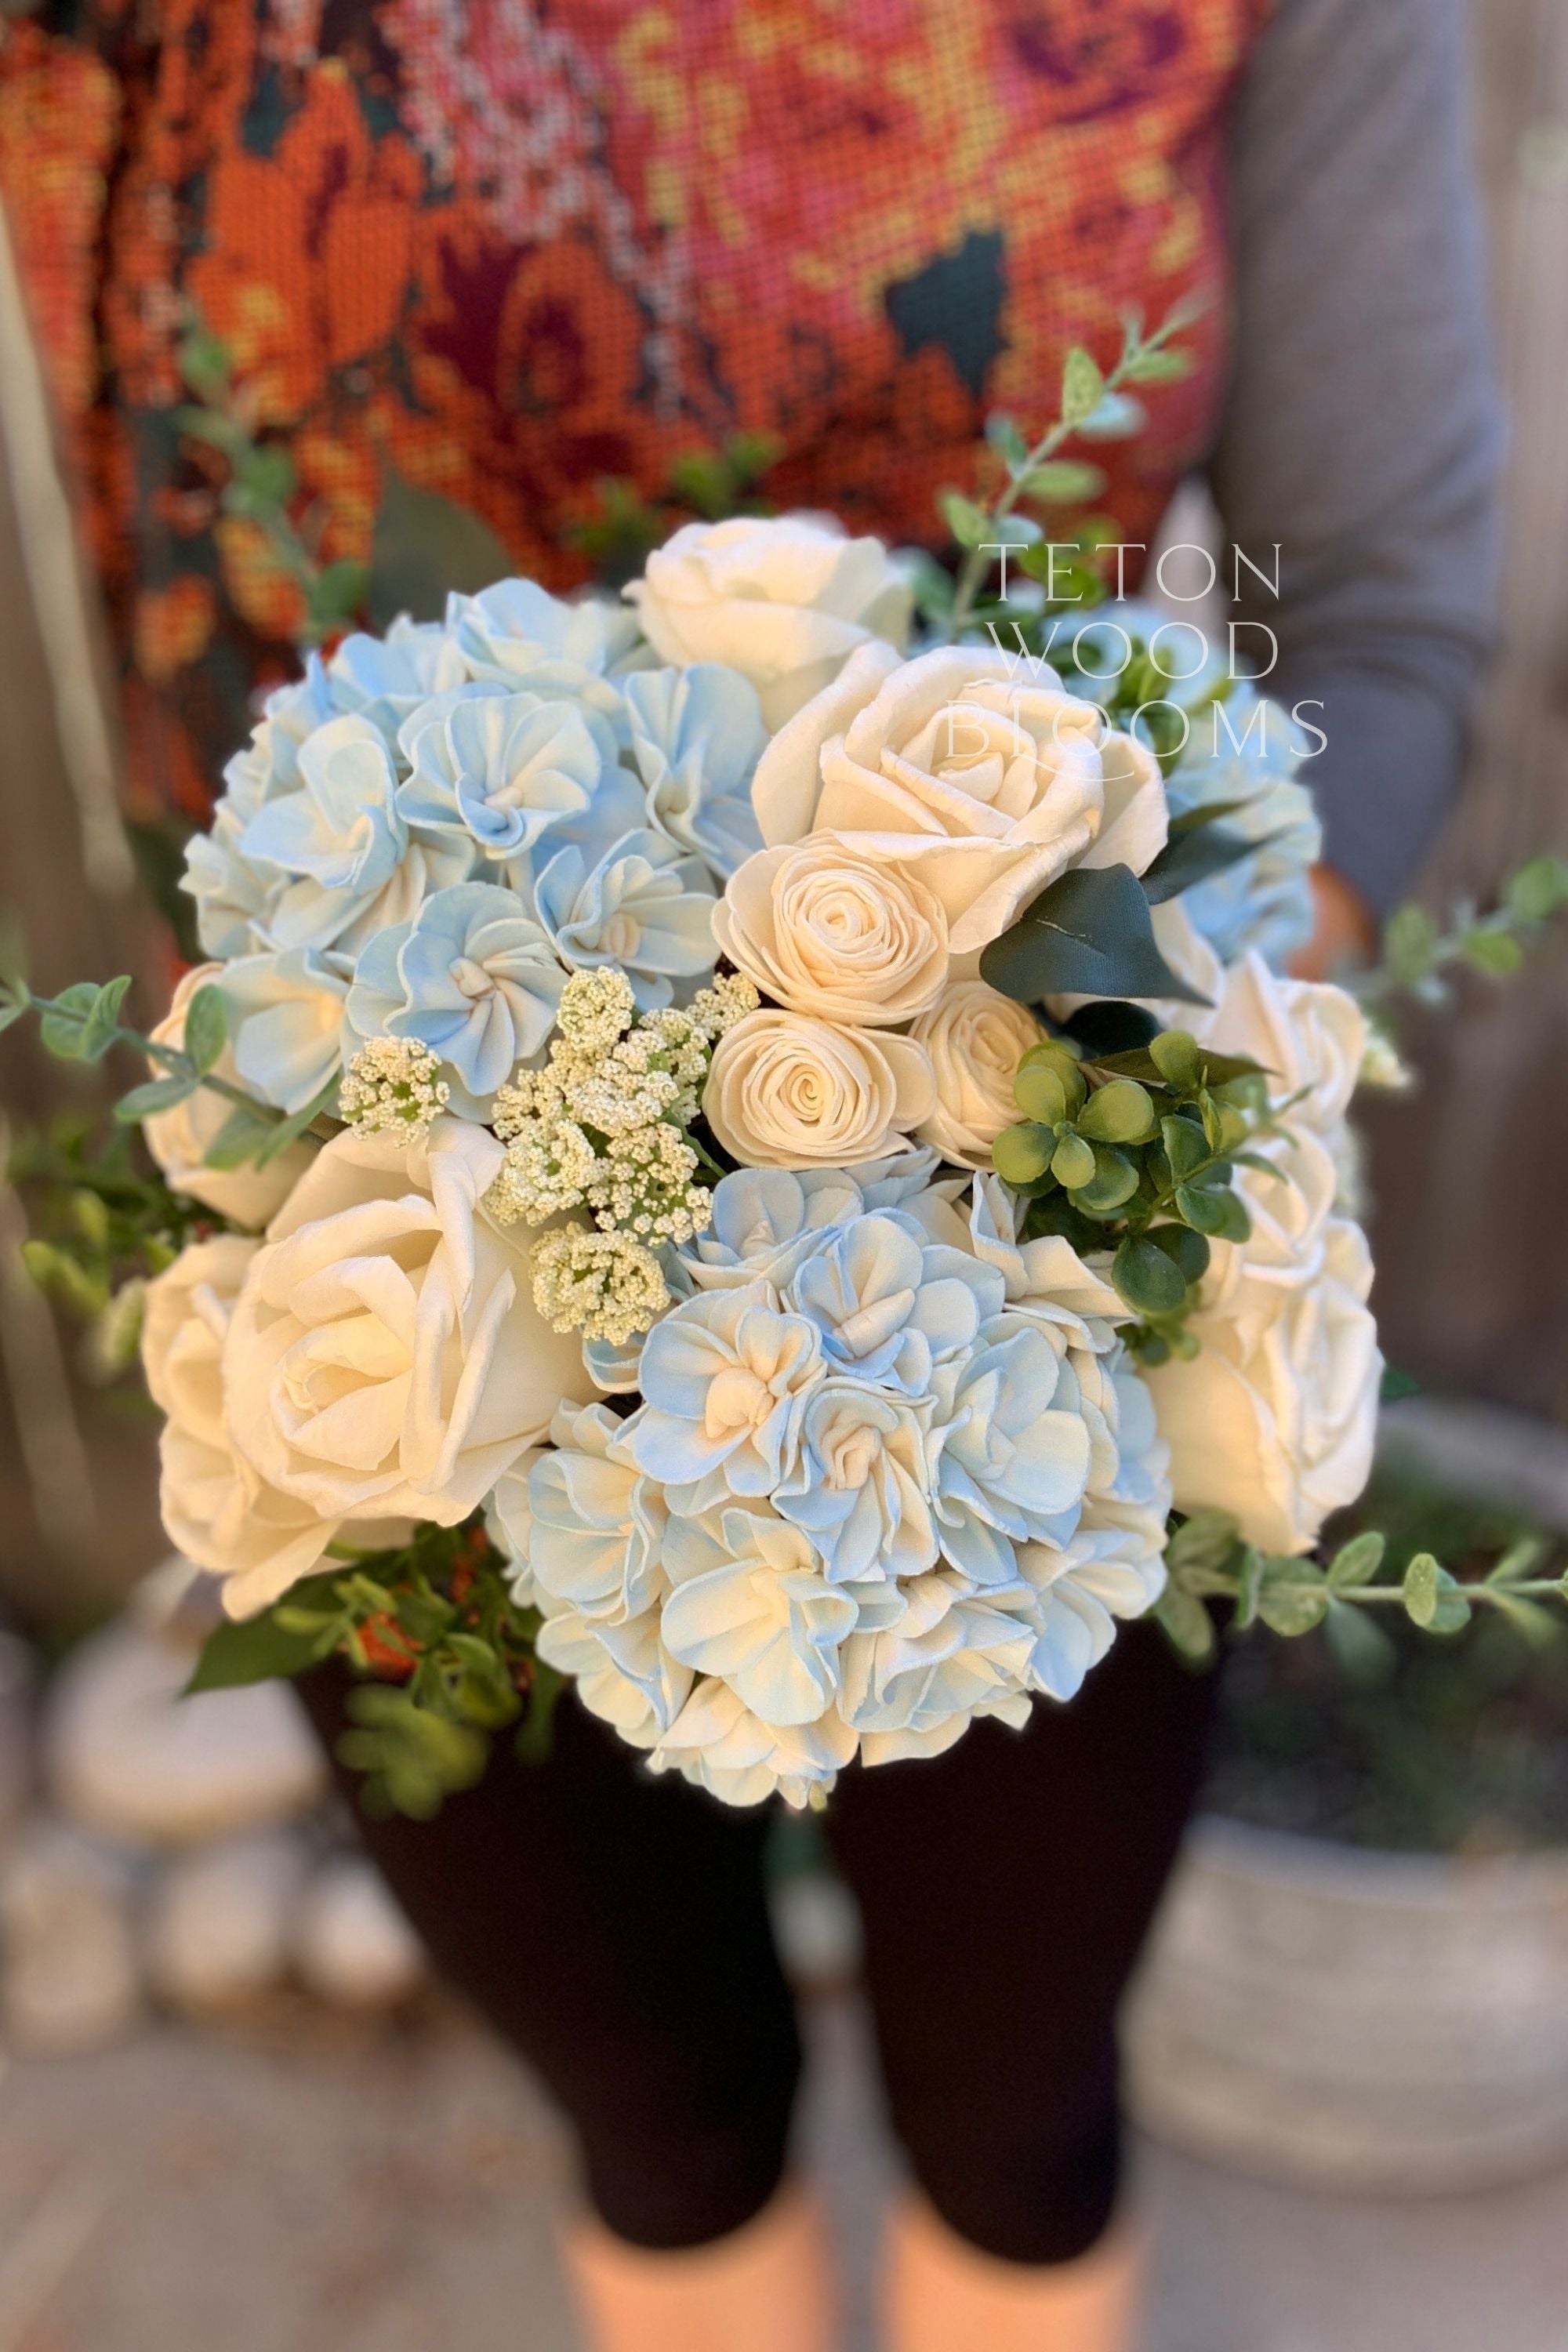 Hydrangea and Rose Bouquet – Teton Wood Blooms